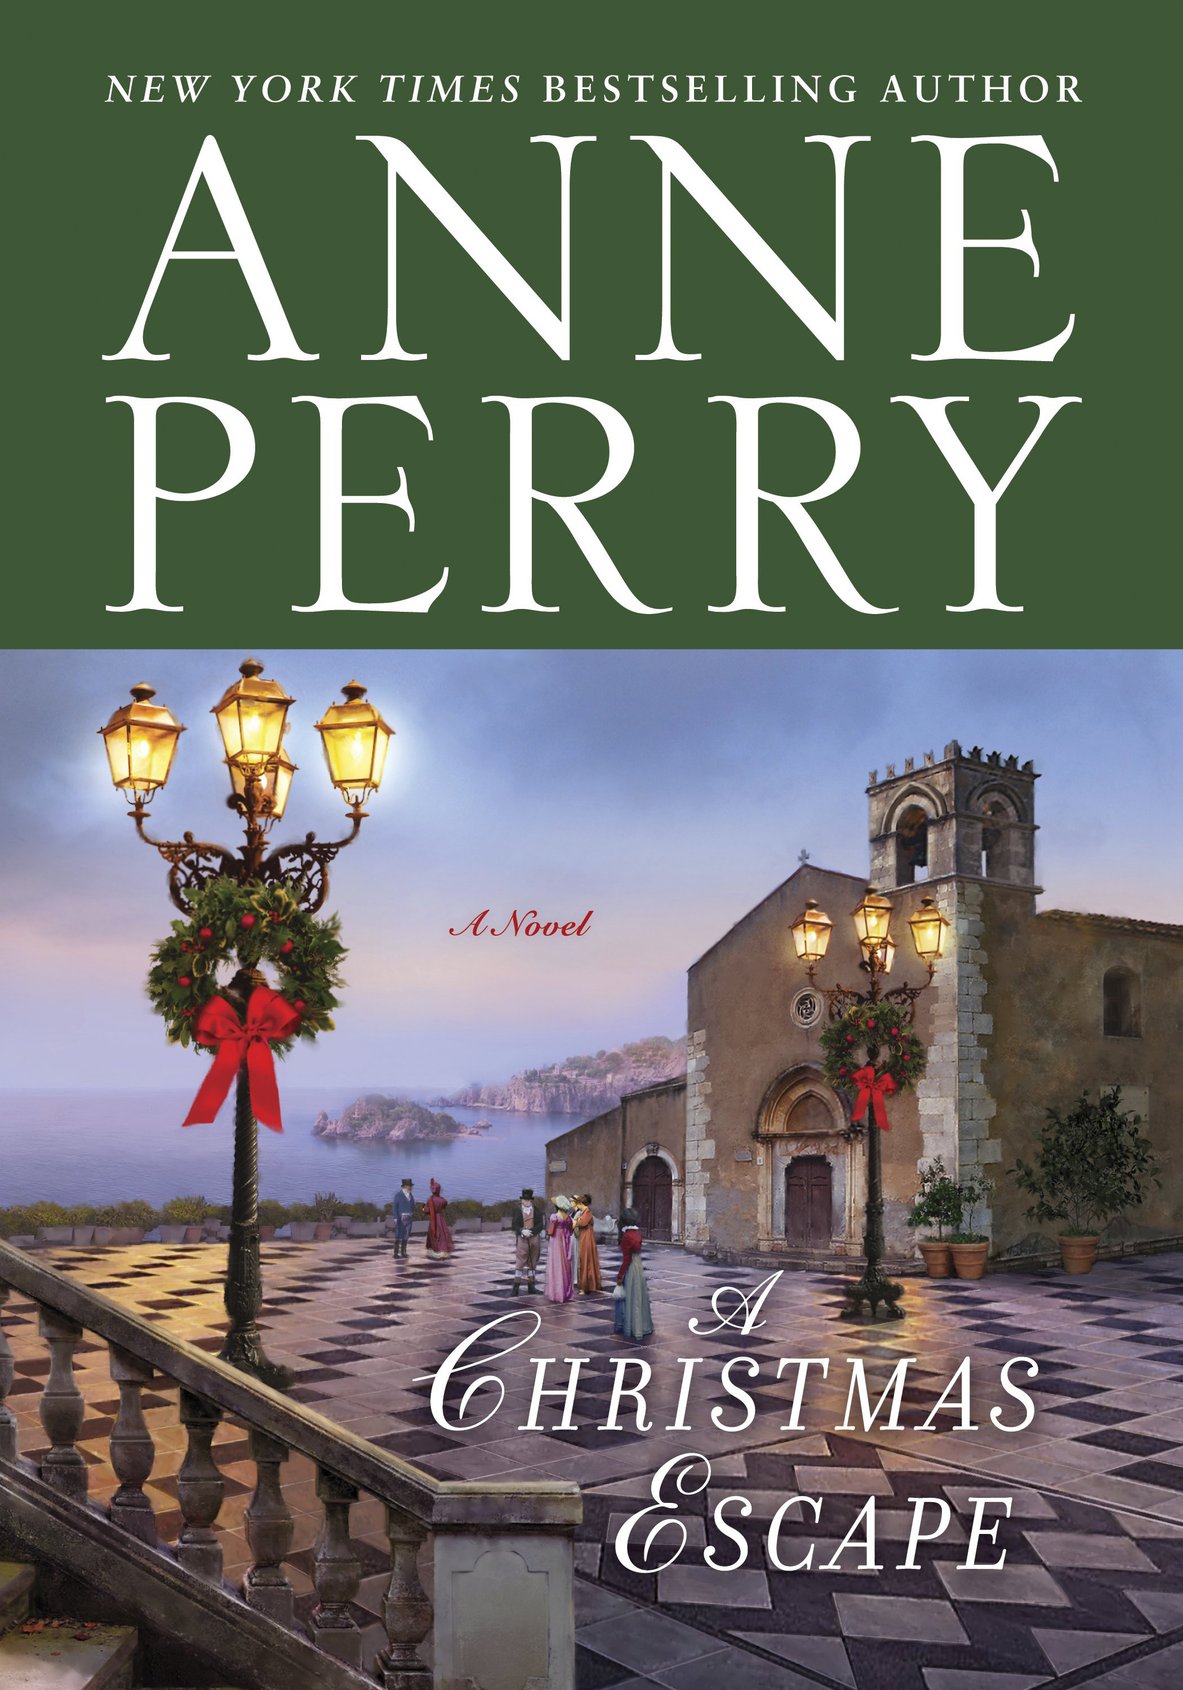 A Christmas Escape (2015) by Anne Perry